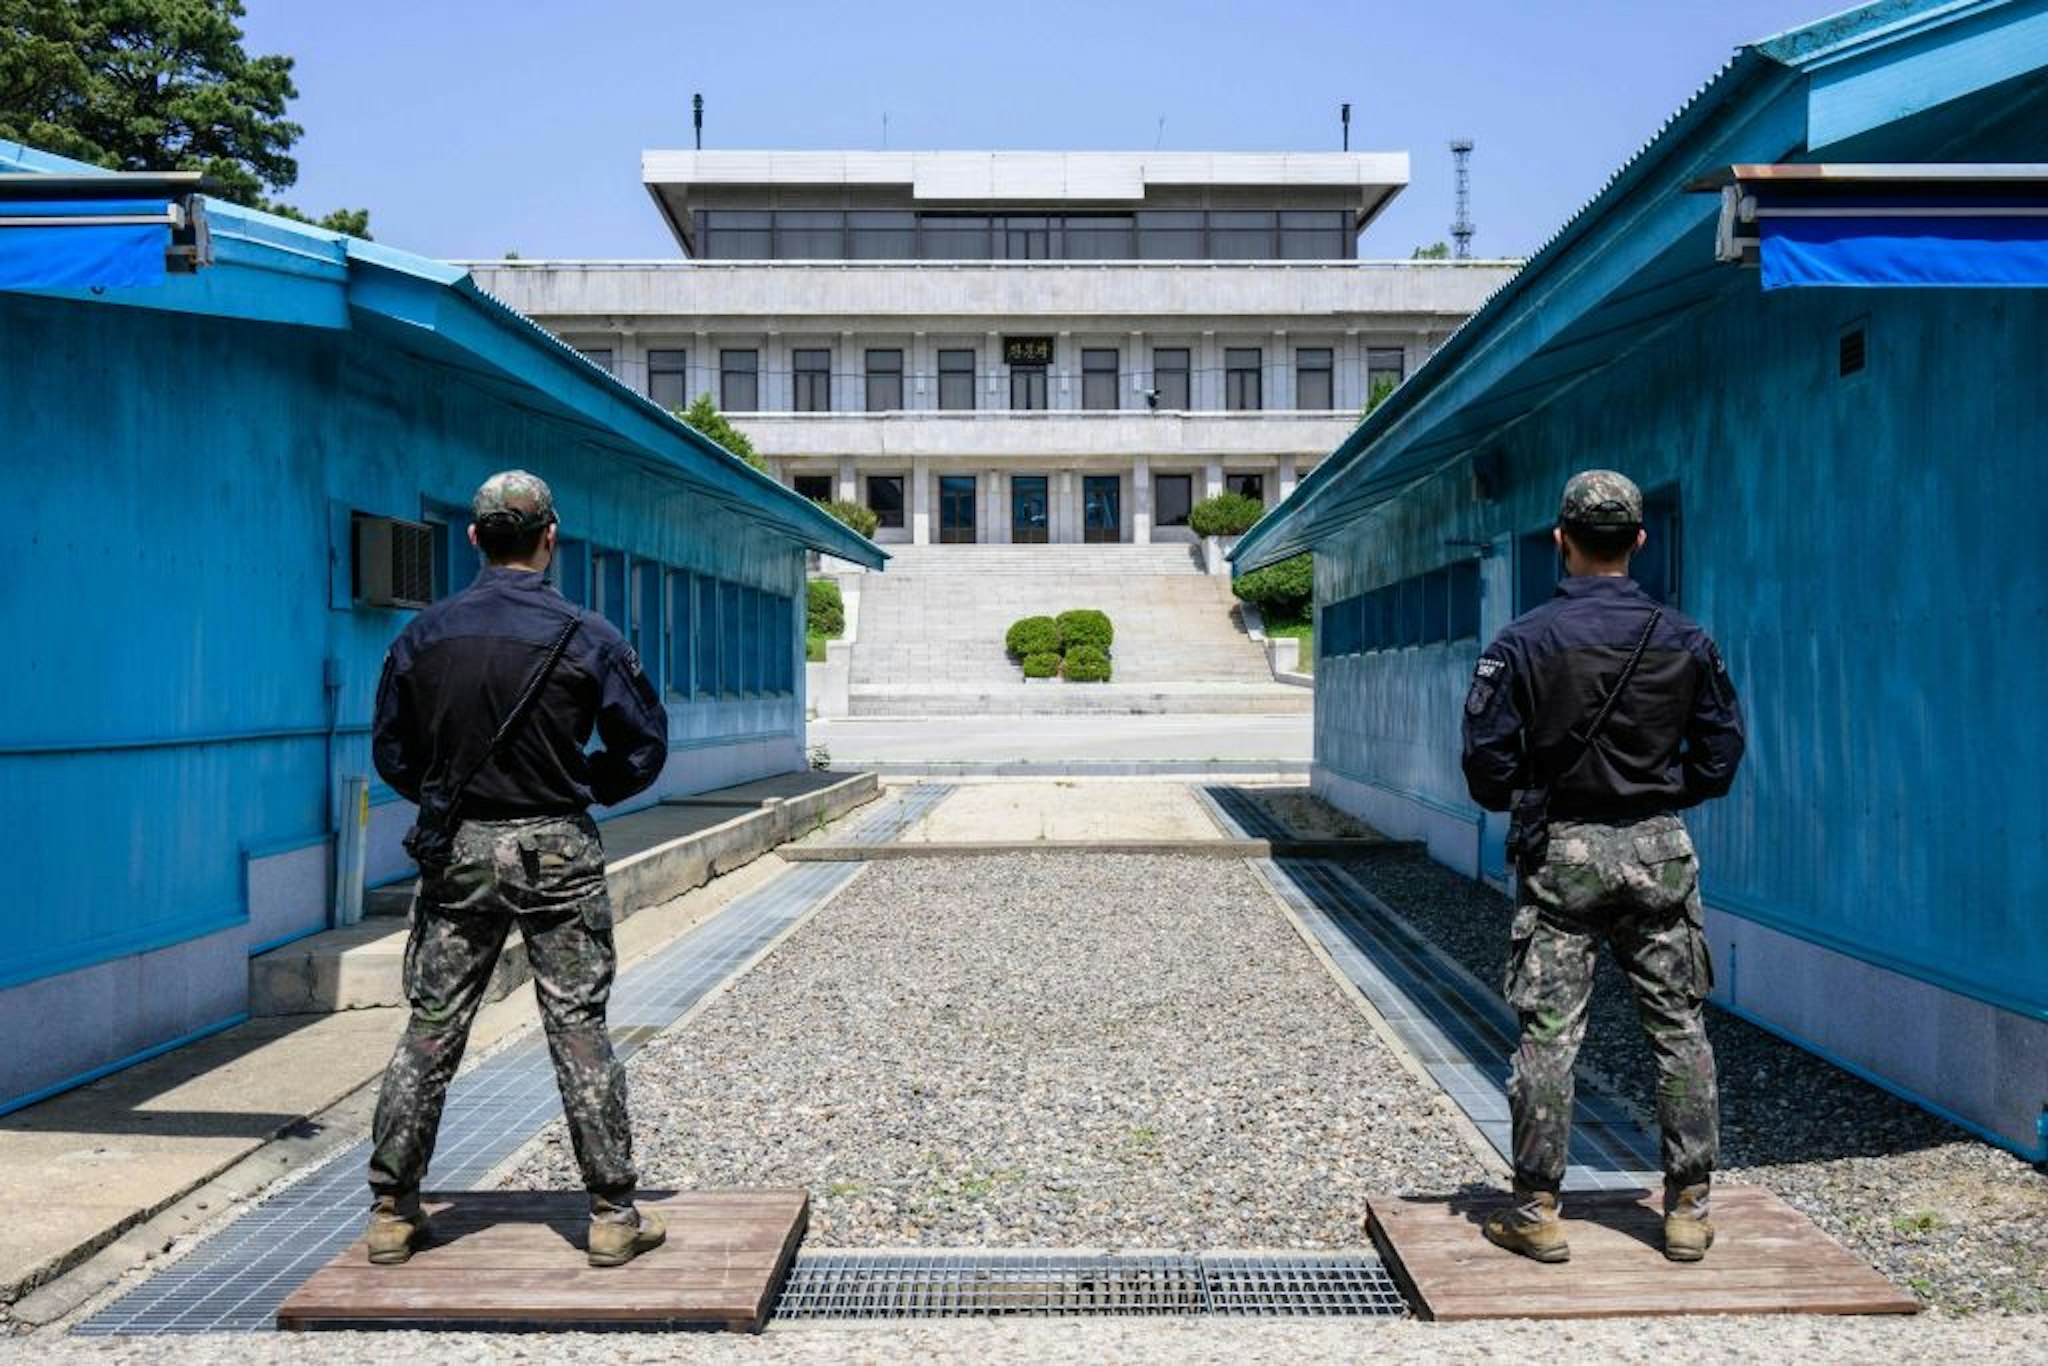 American In North Korean Custody After Crossing DMZ During Tour | The ...